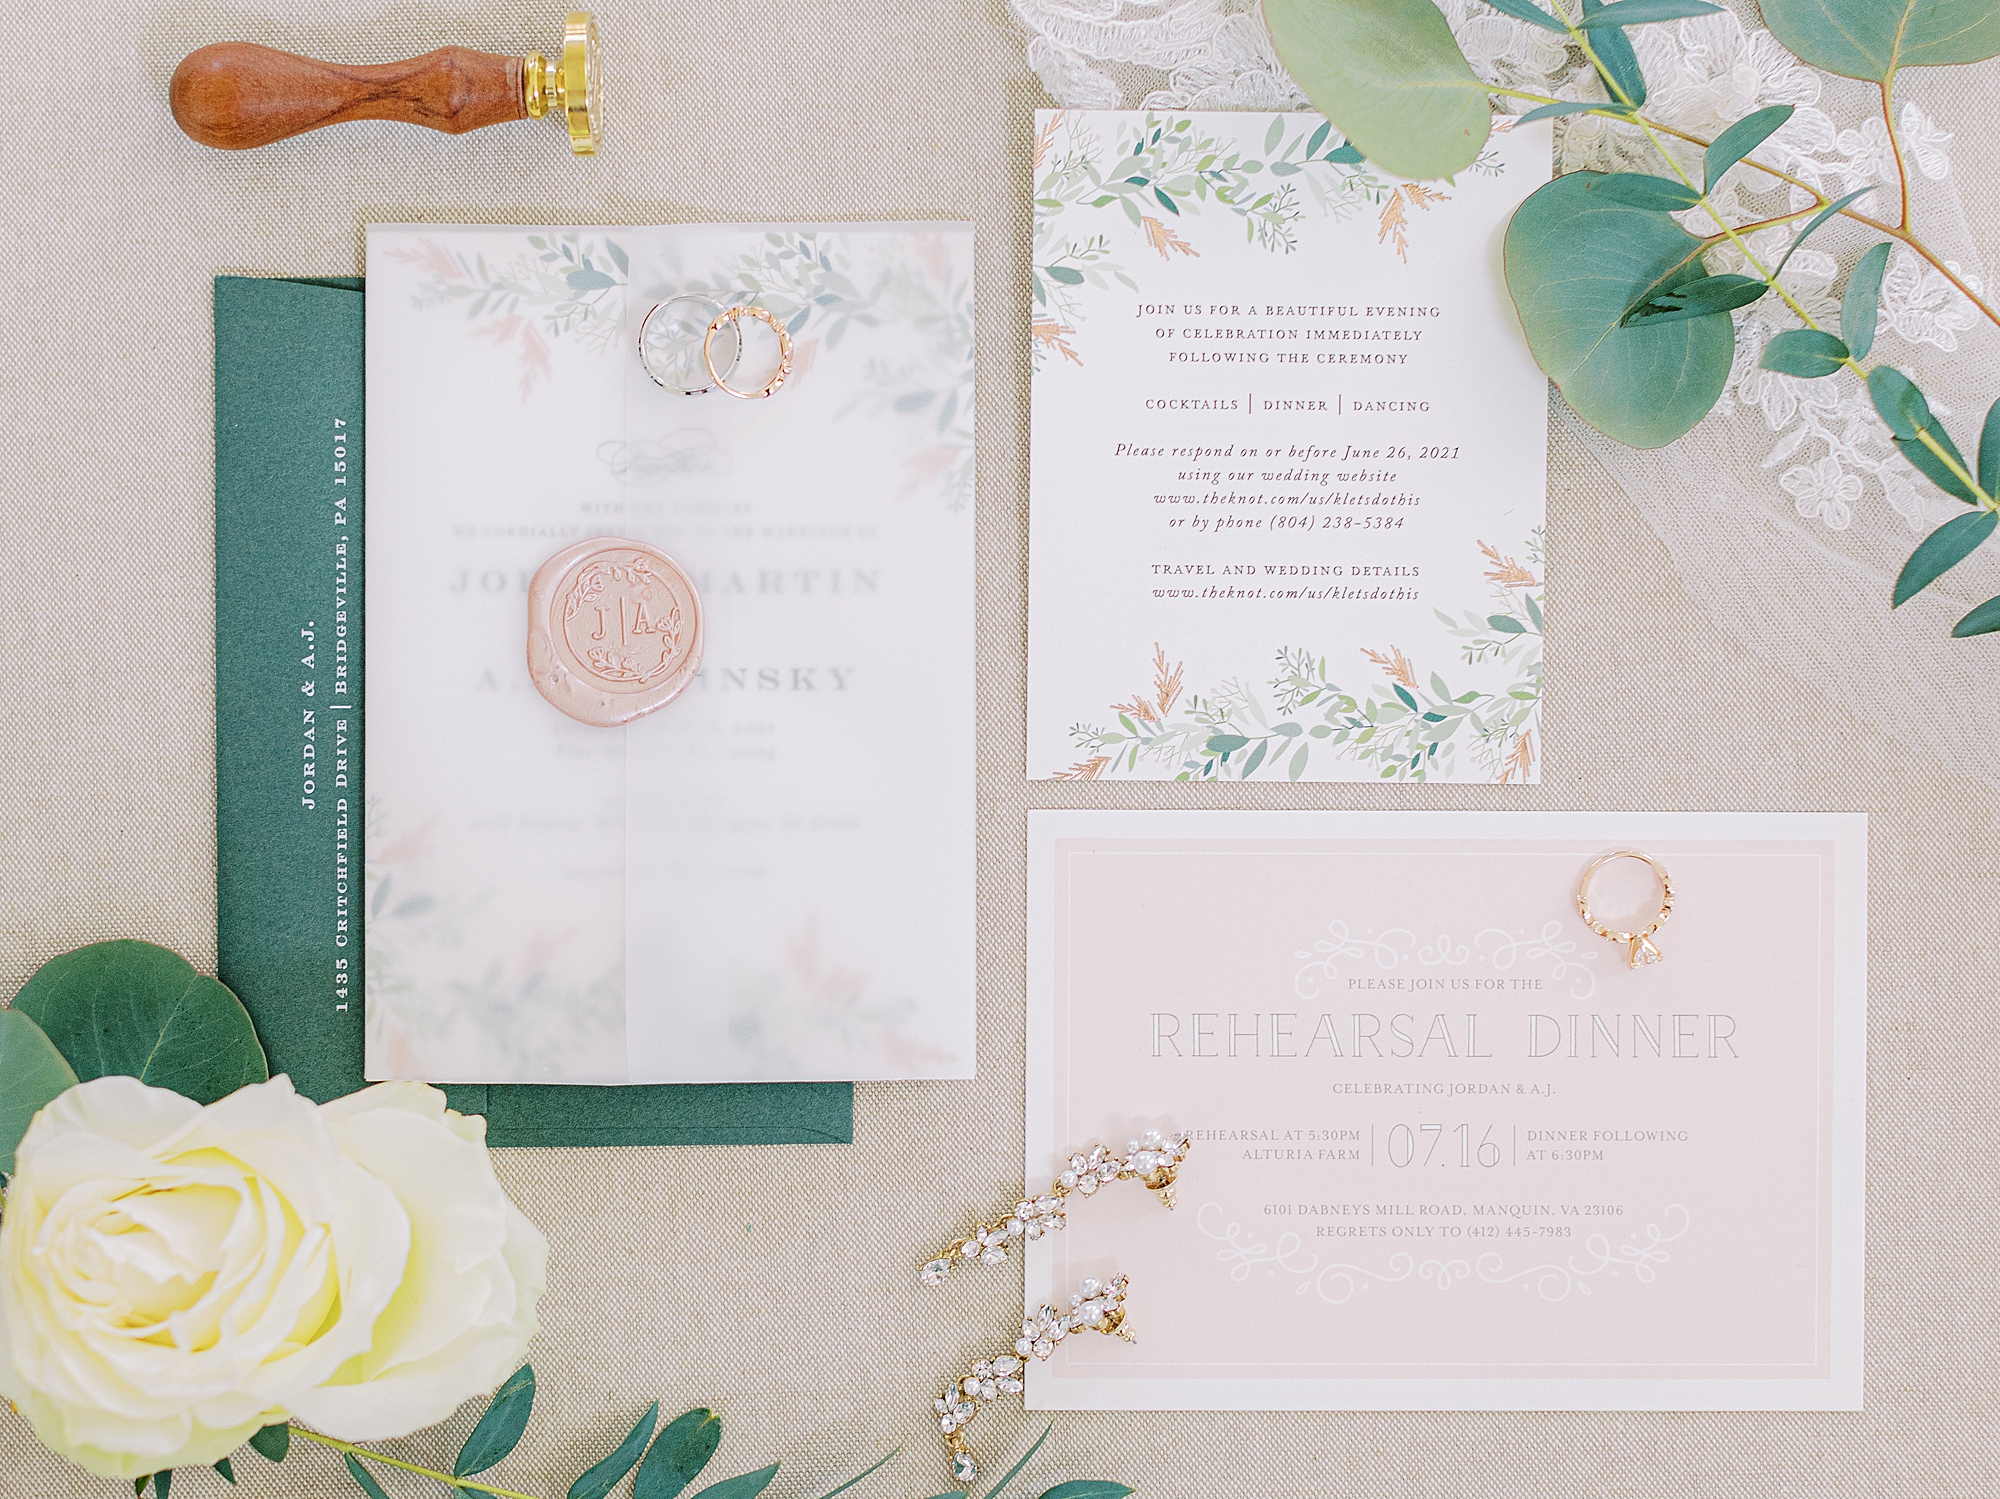 Blush and sage invitation suite with rose colored stamp.